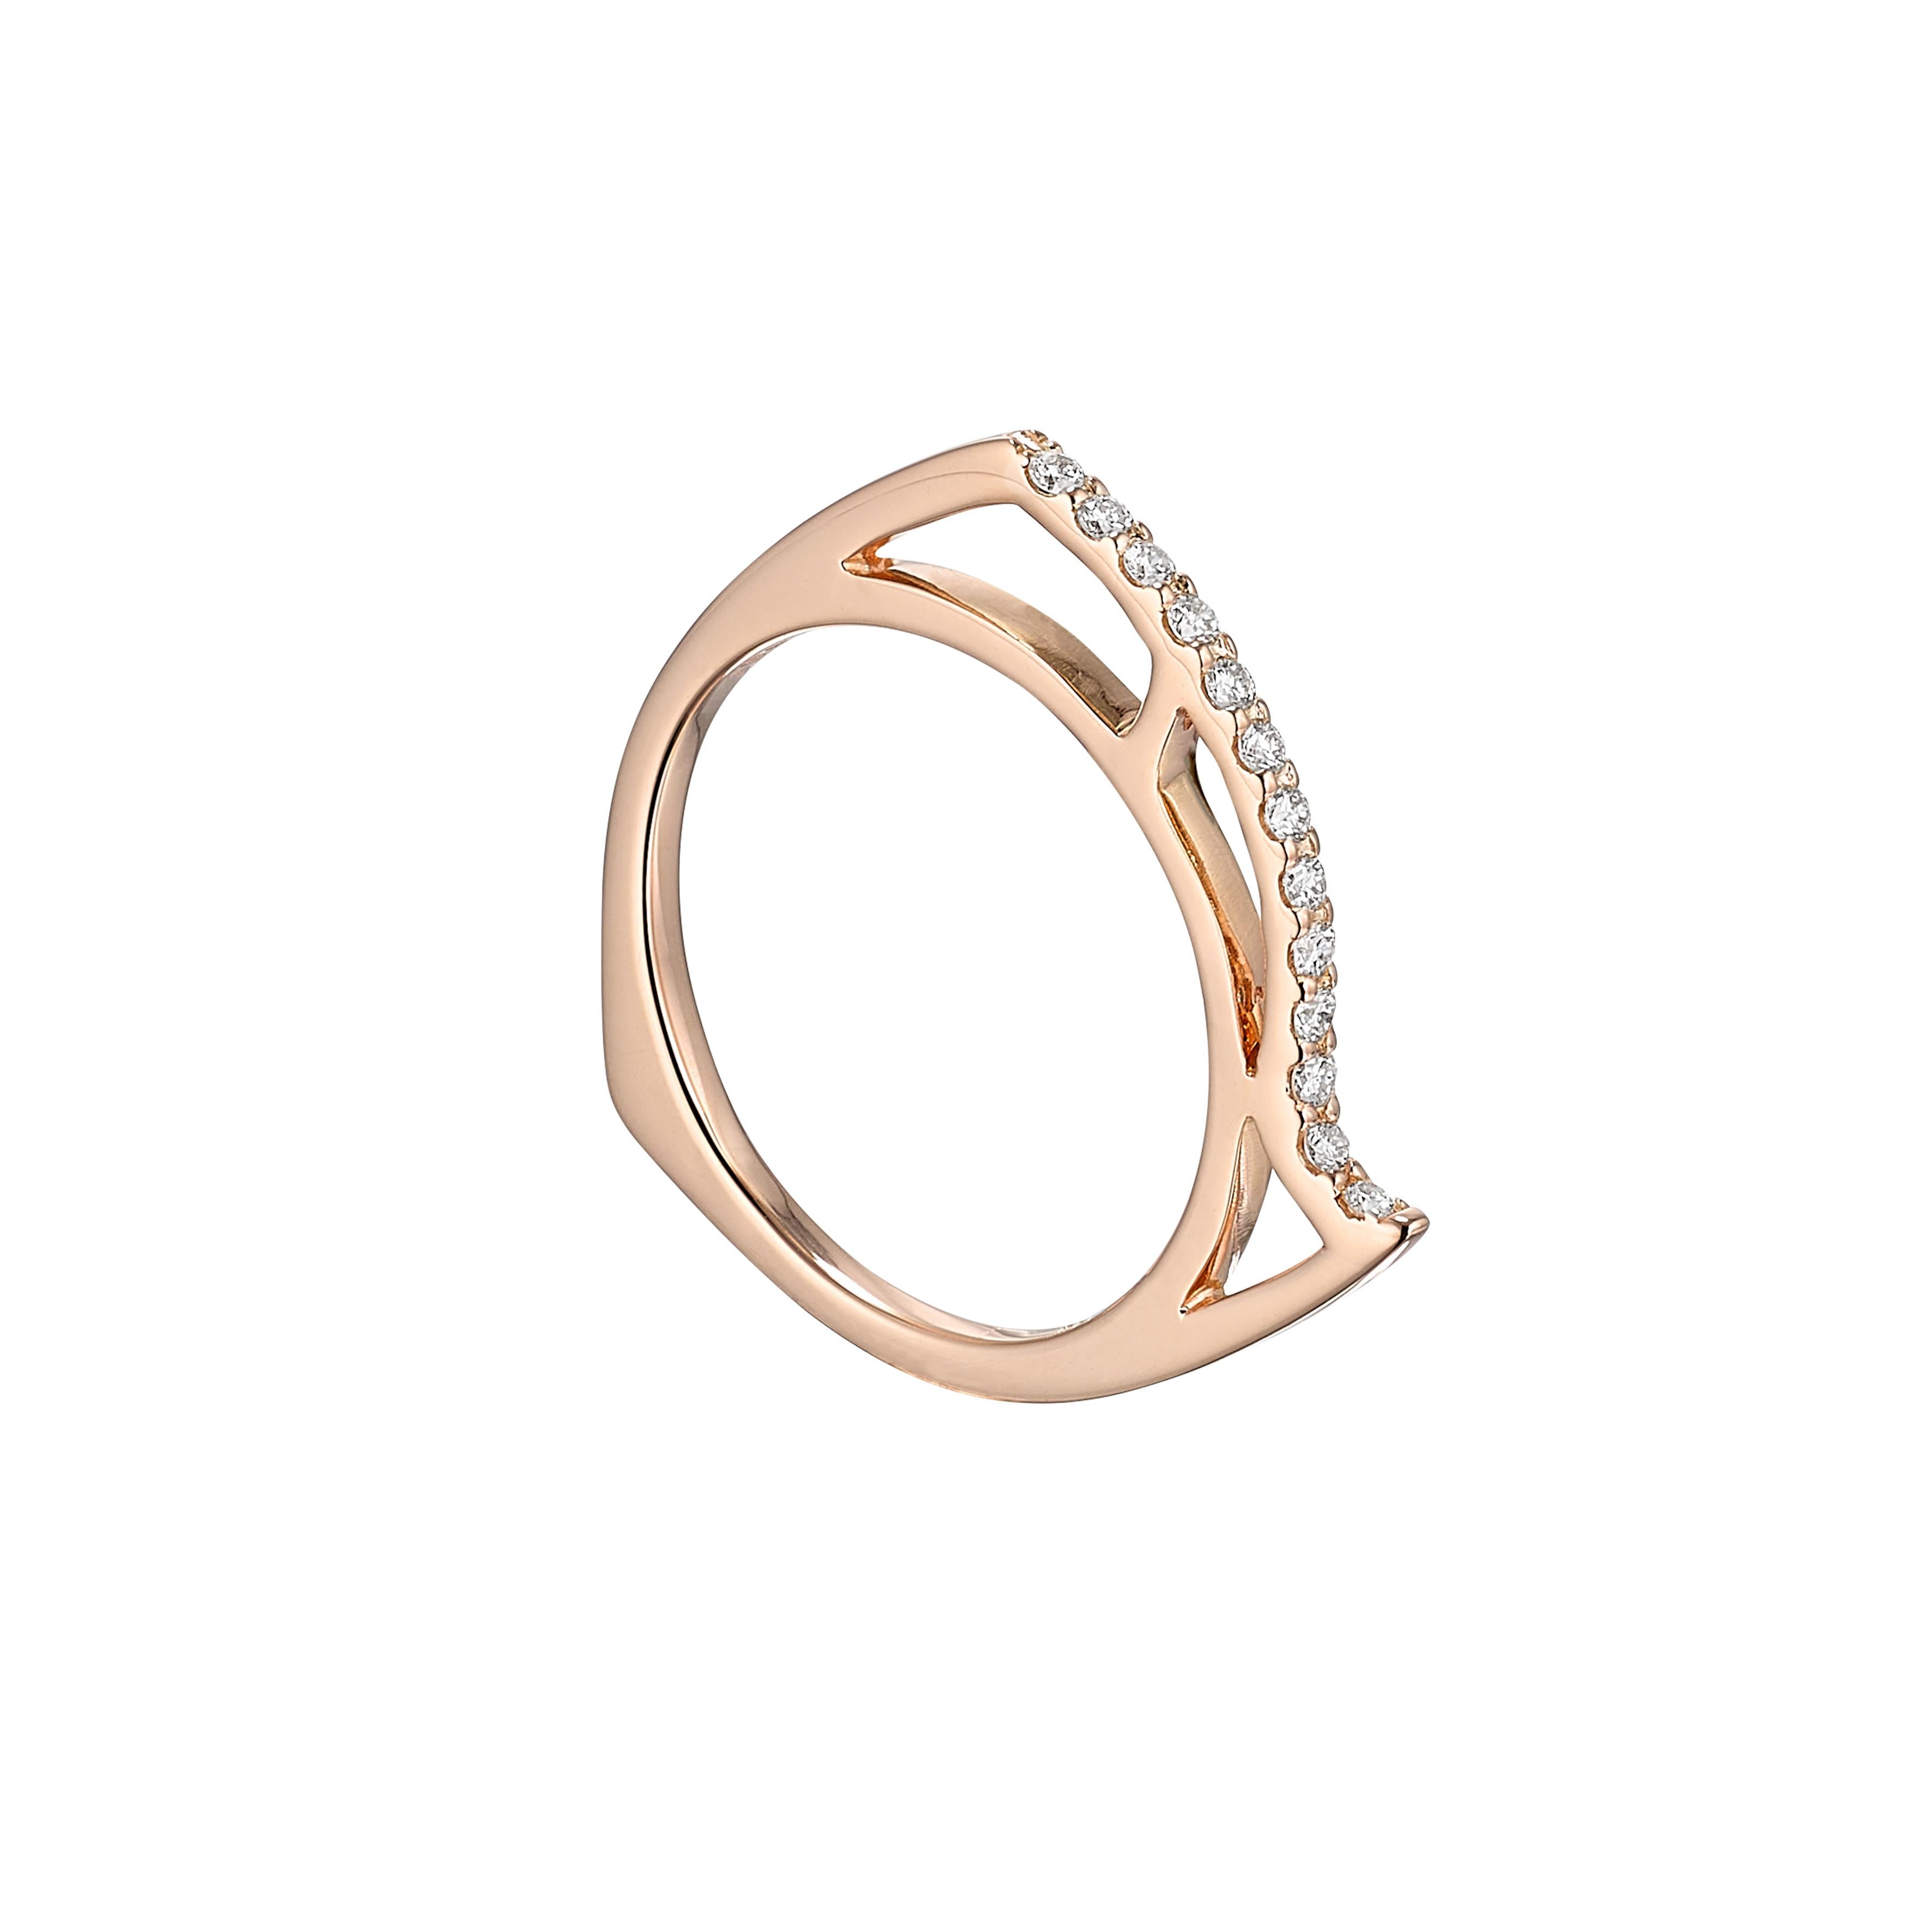 MORPHO BLOOM COLLECTION 

‘He loves me, he loves me not...’

A contemporary twist on the classic eternity band, delicate diamonds are meticulously hand-set into 14k - 18ct white, yellow or rose gold. A timeless collection, the elegant simplicity,